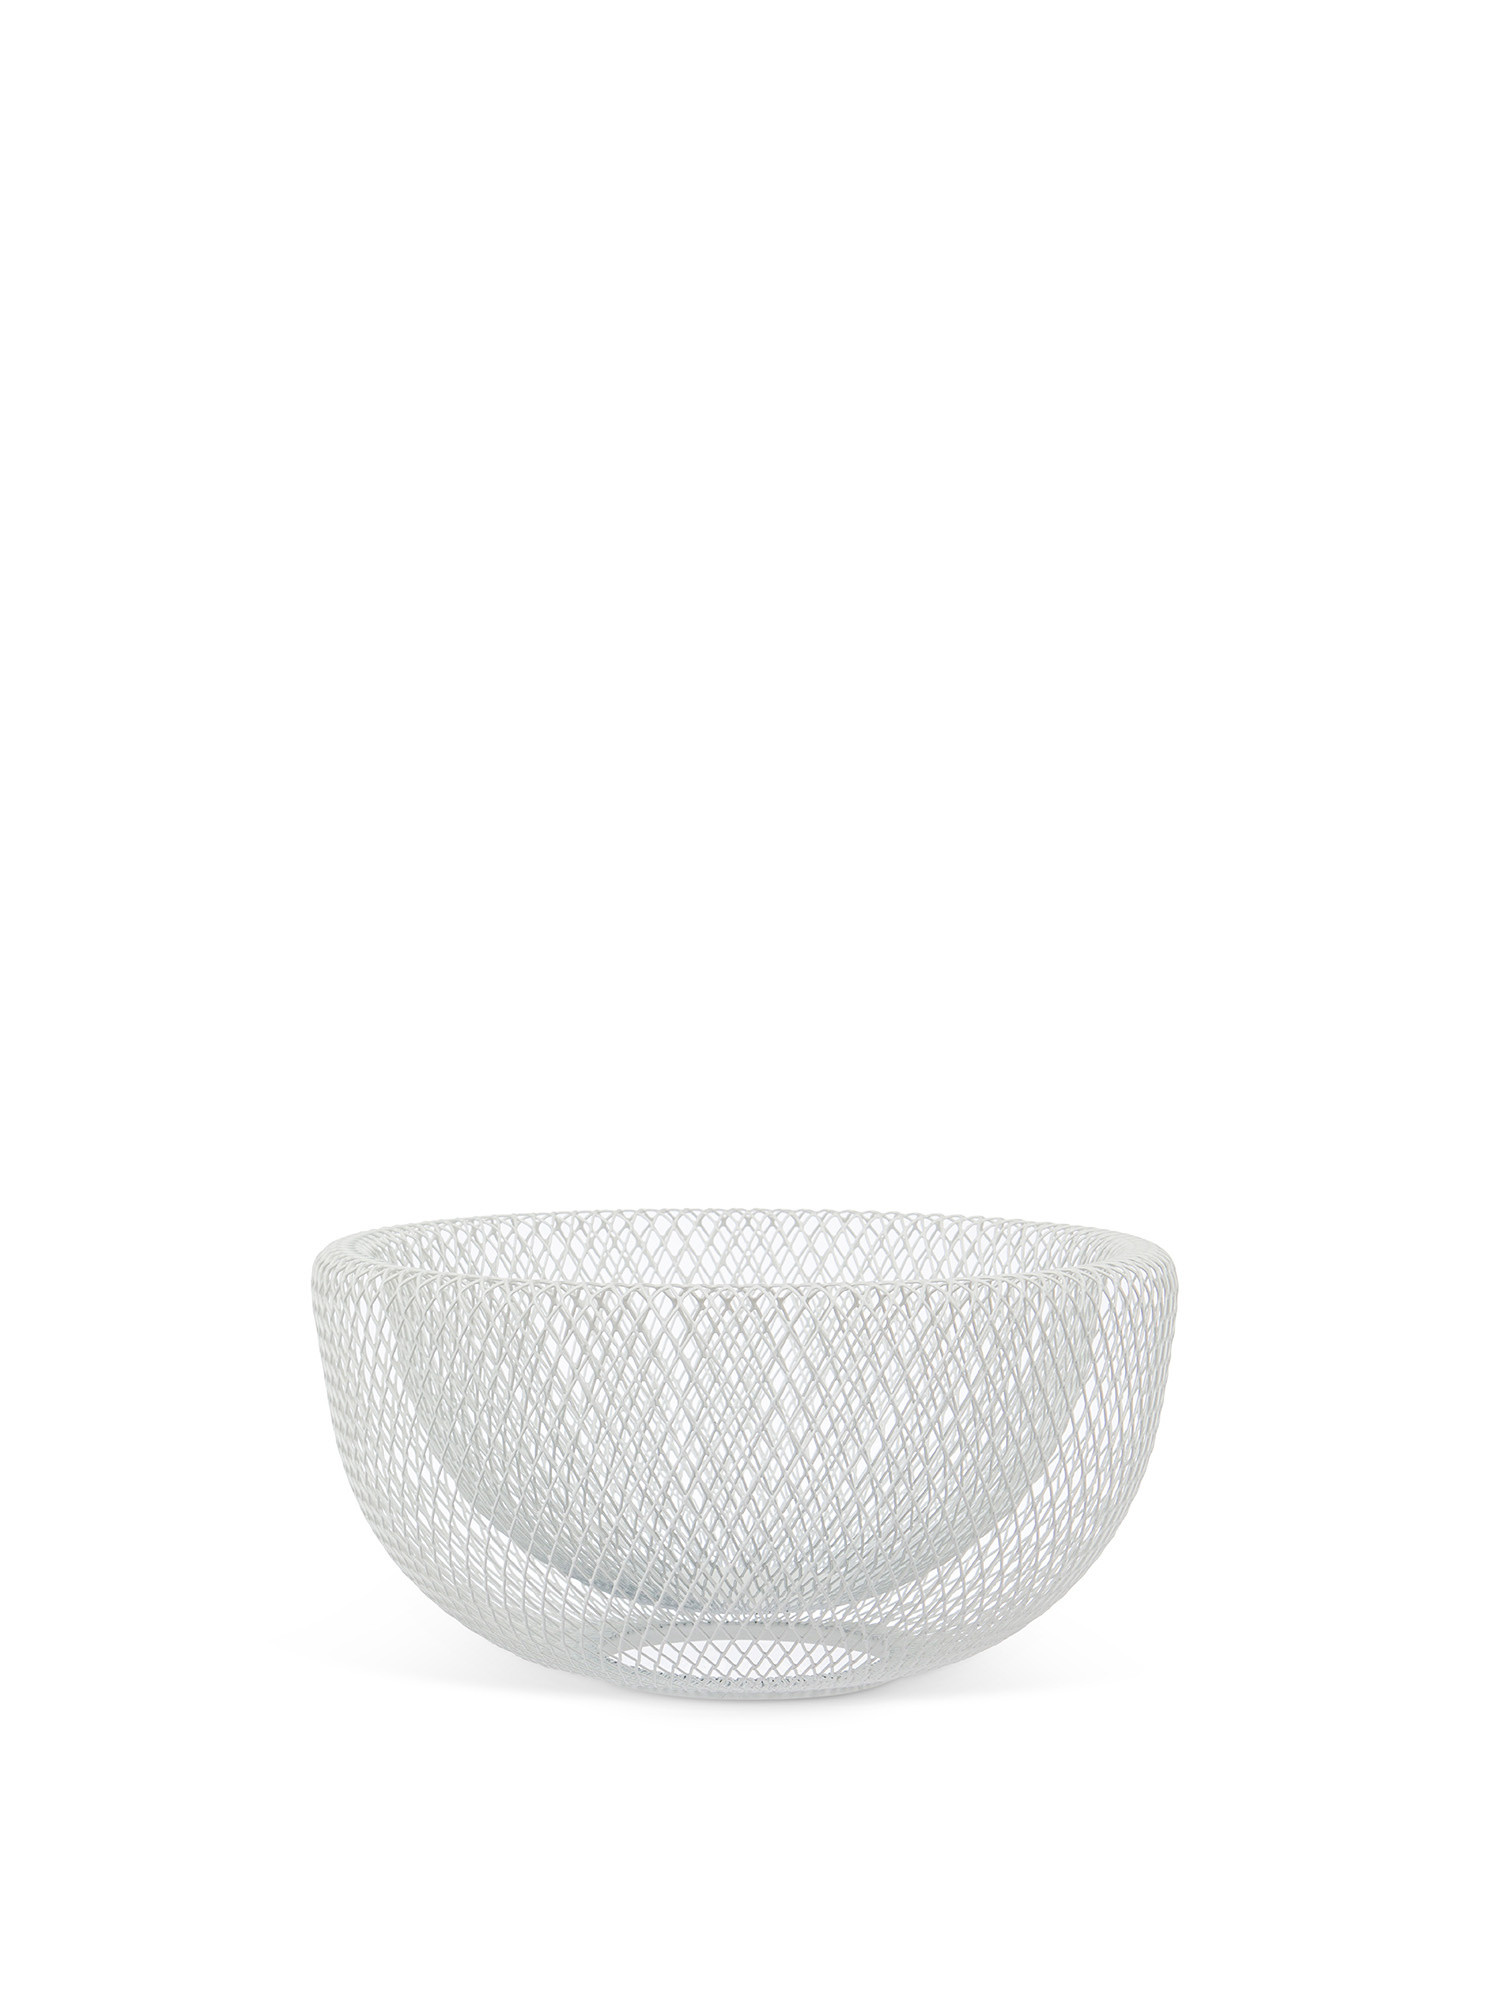 White wire basket, White, large image number 0